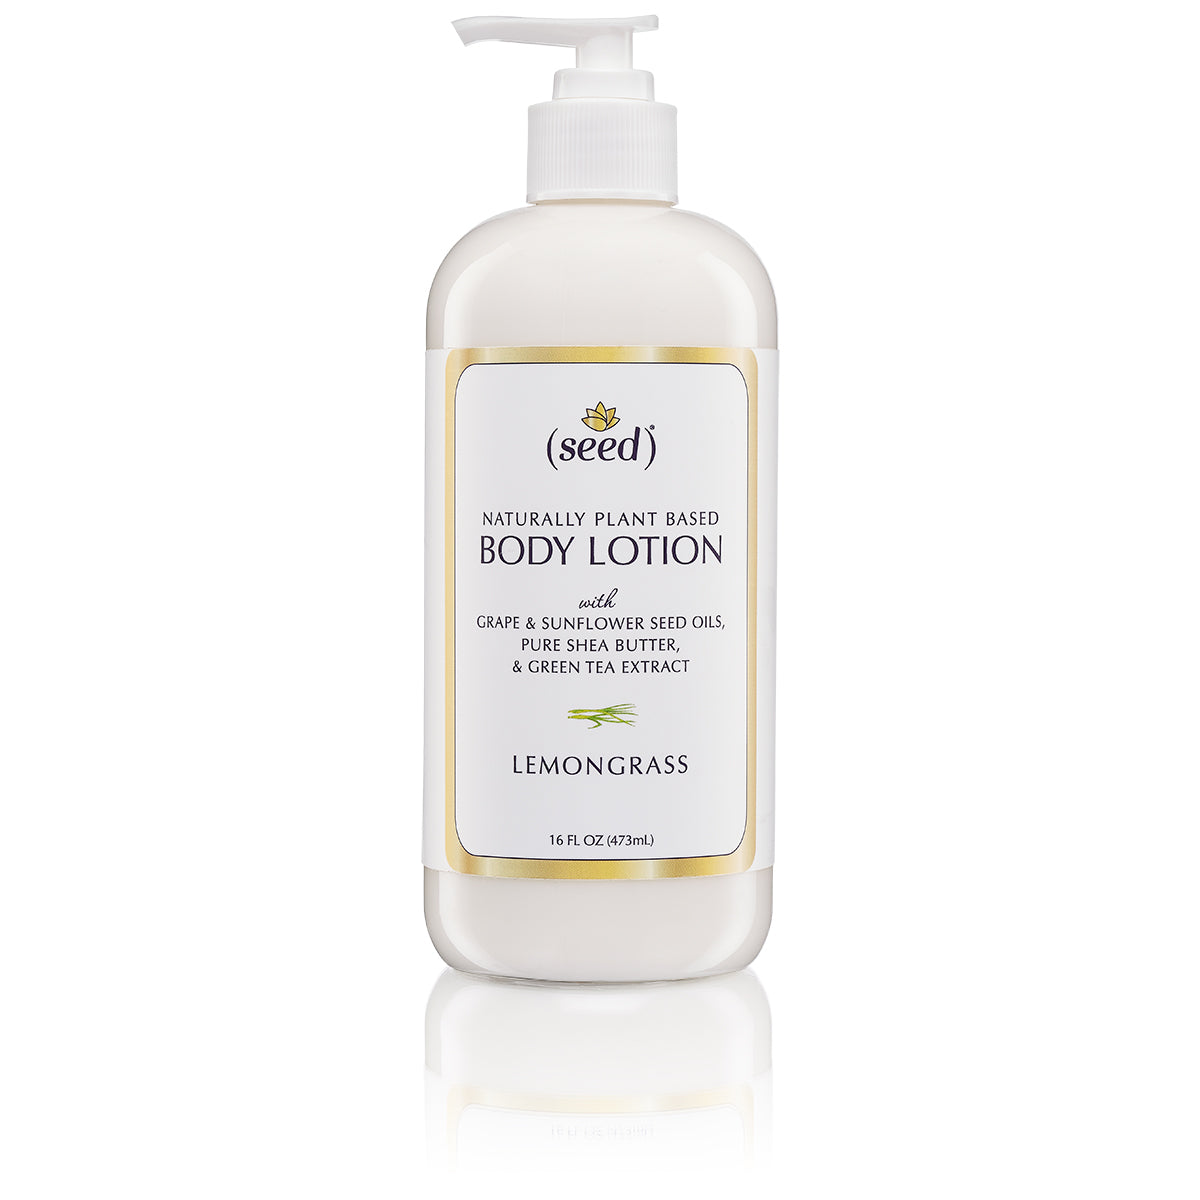 Seed Lemongrass Body Lotion with grape and sunflower seed oils, pure shea butter, green tea extract, and lemongrass essential oil